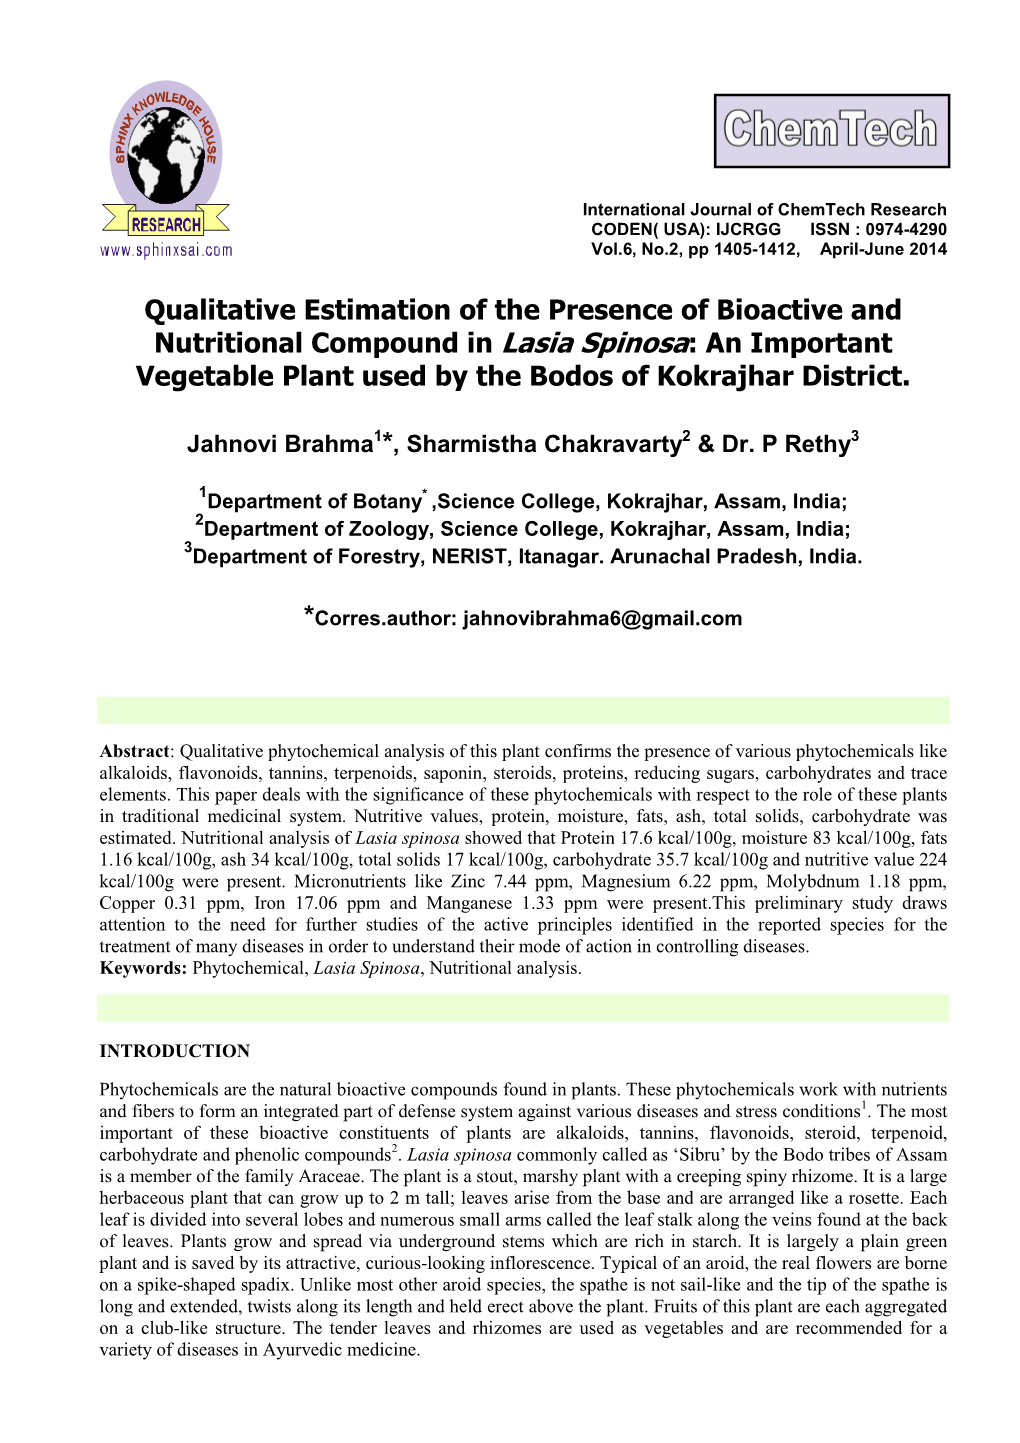 Qualitative Estimation of the Presence of Bioactive and Nutritional Compound in Lasia Spinosa : an Important Vegetable Plant Used by the Bodos of Kokrajhar District